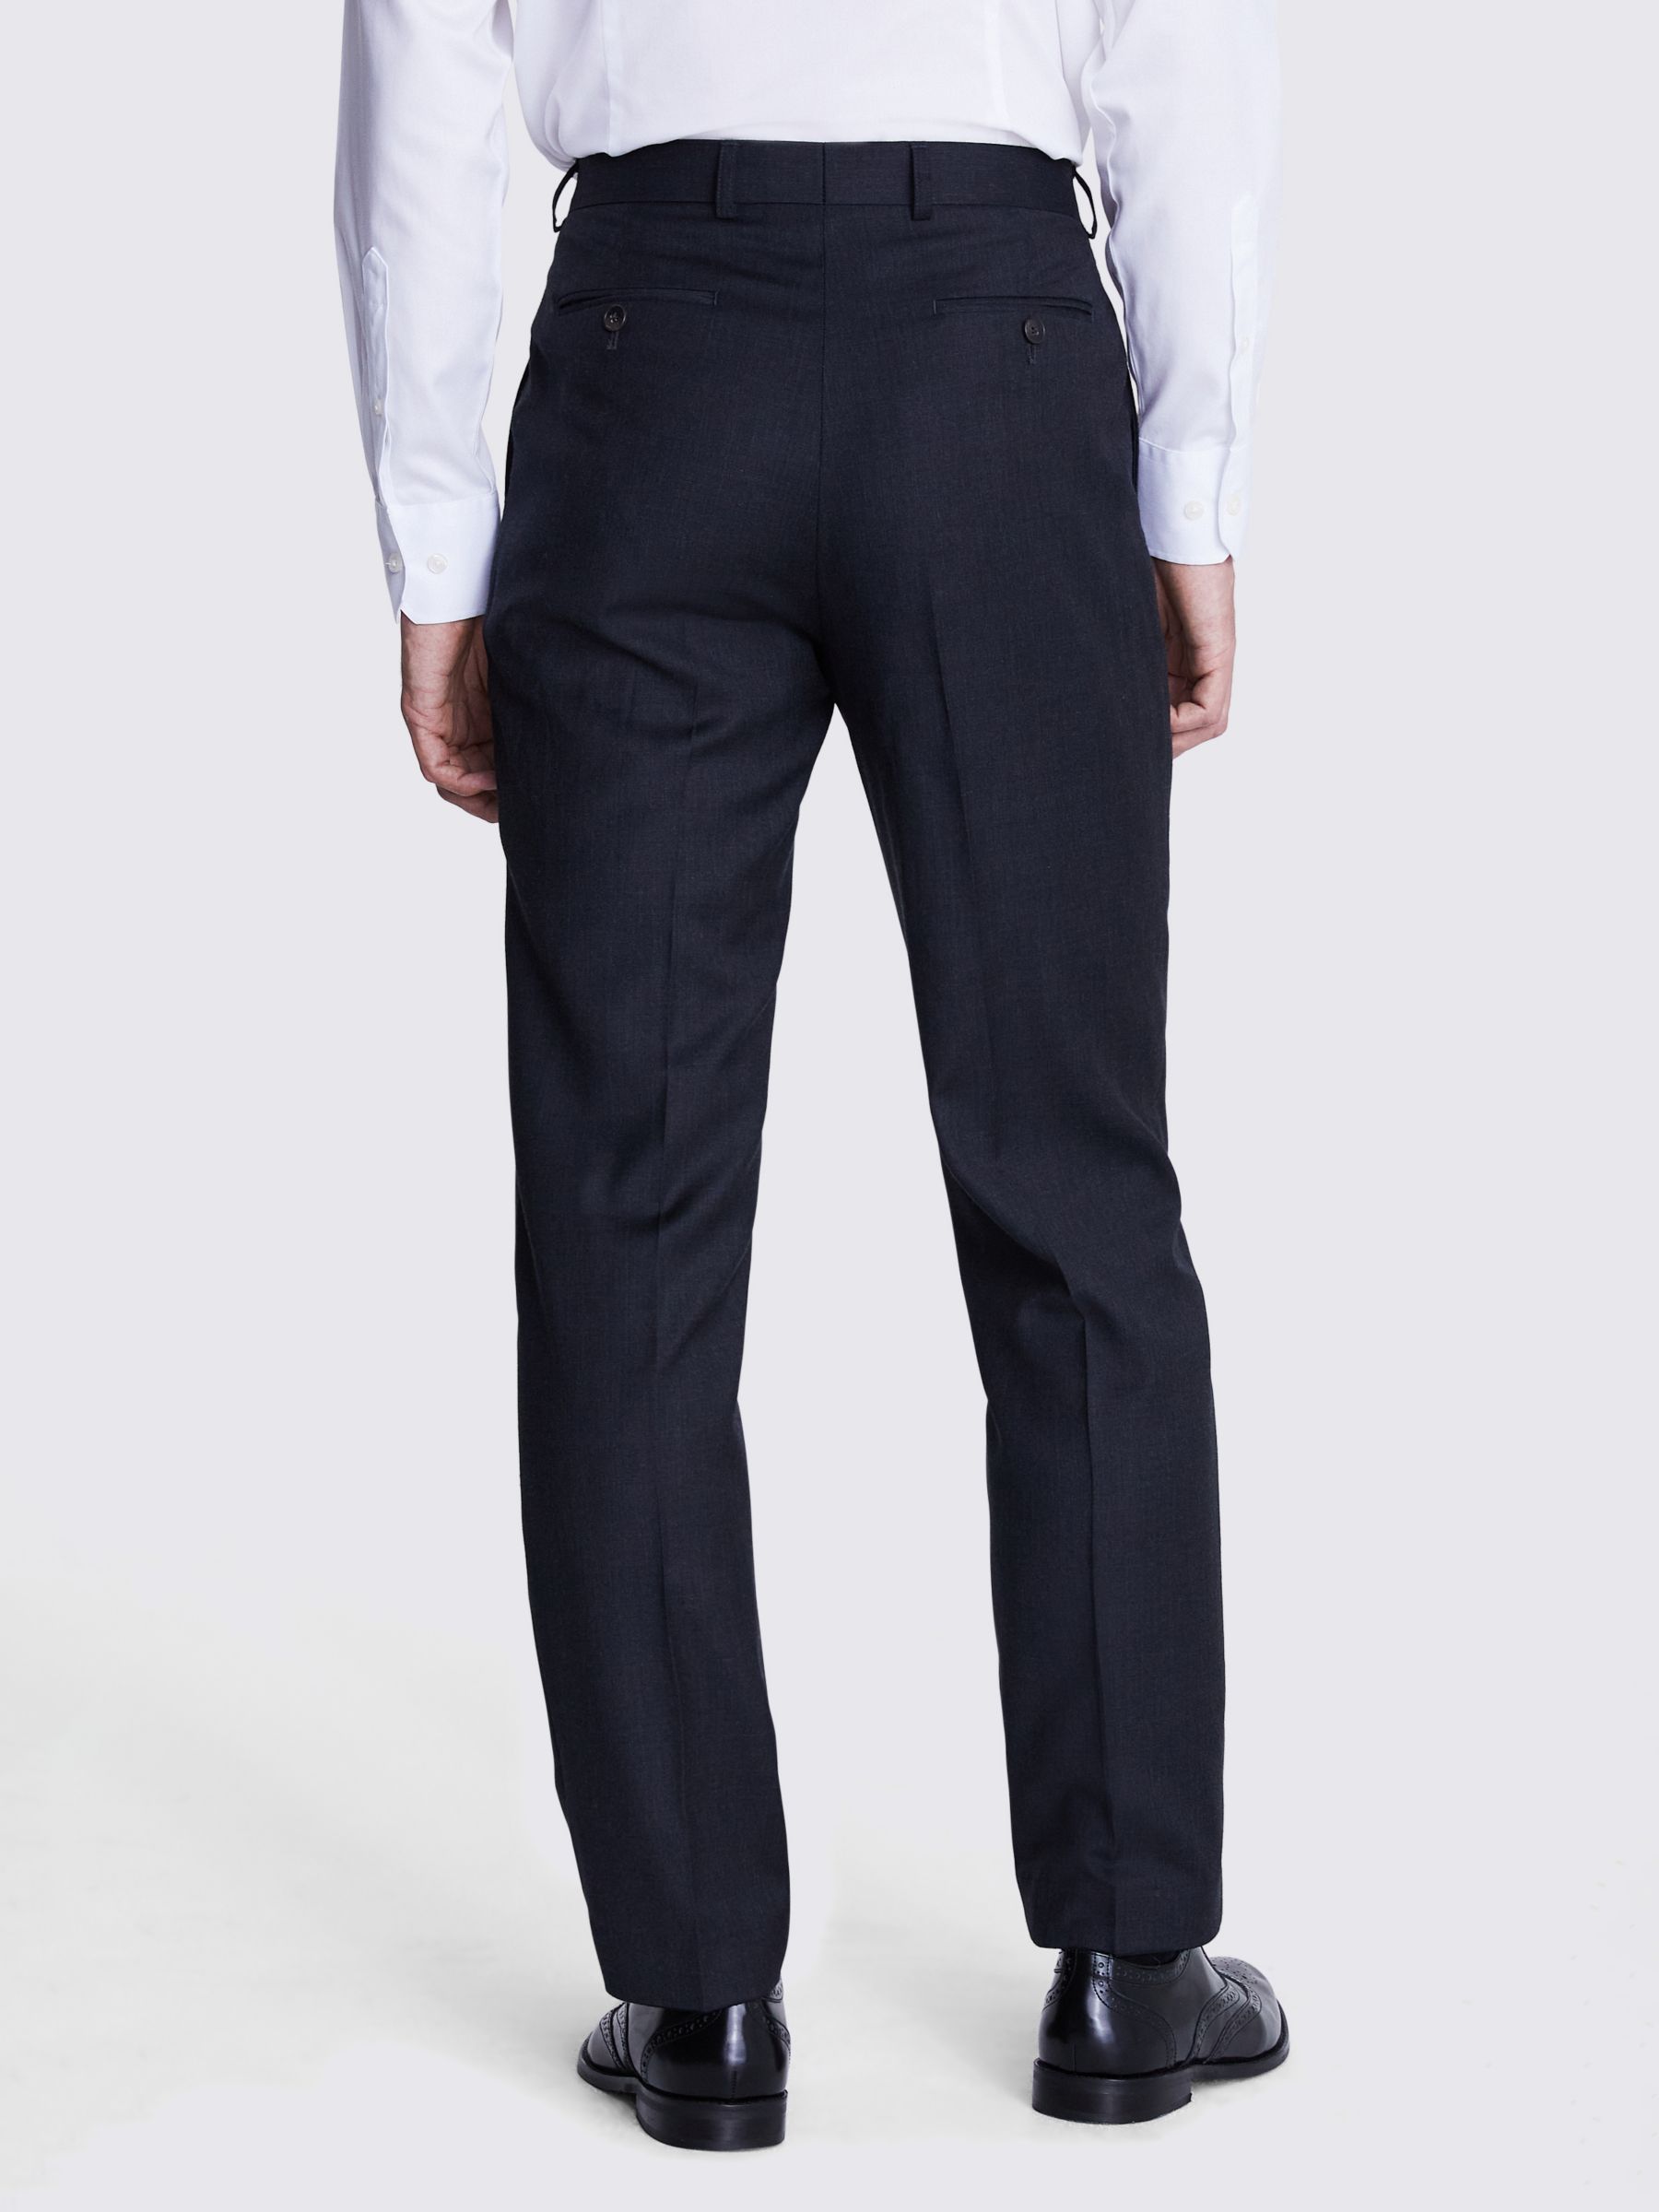 Moss Regular Fit Wool Twill Trousers, Grey at John Lewis & Partners